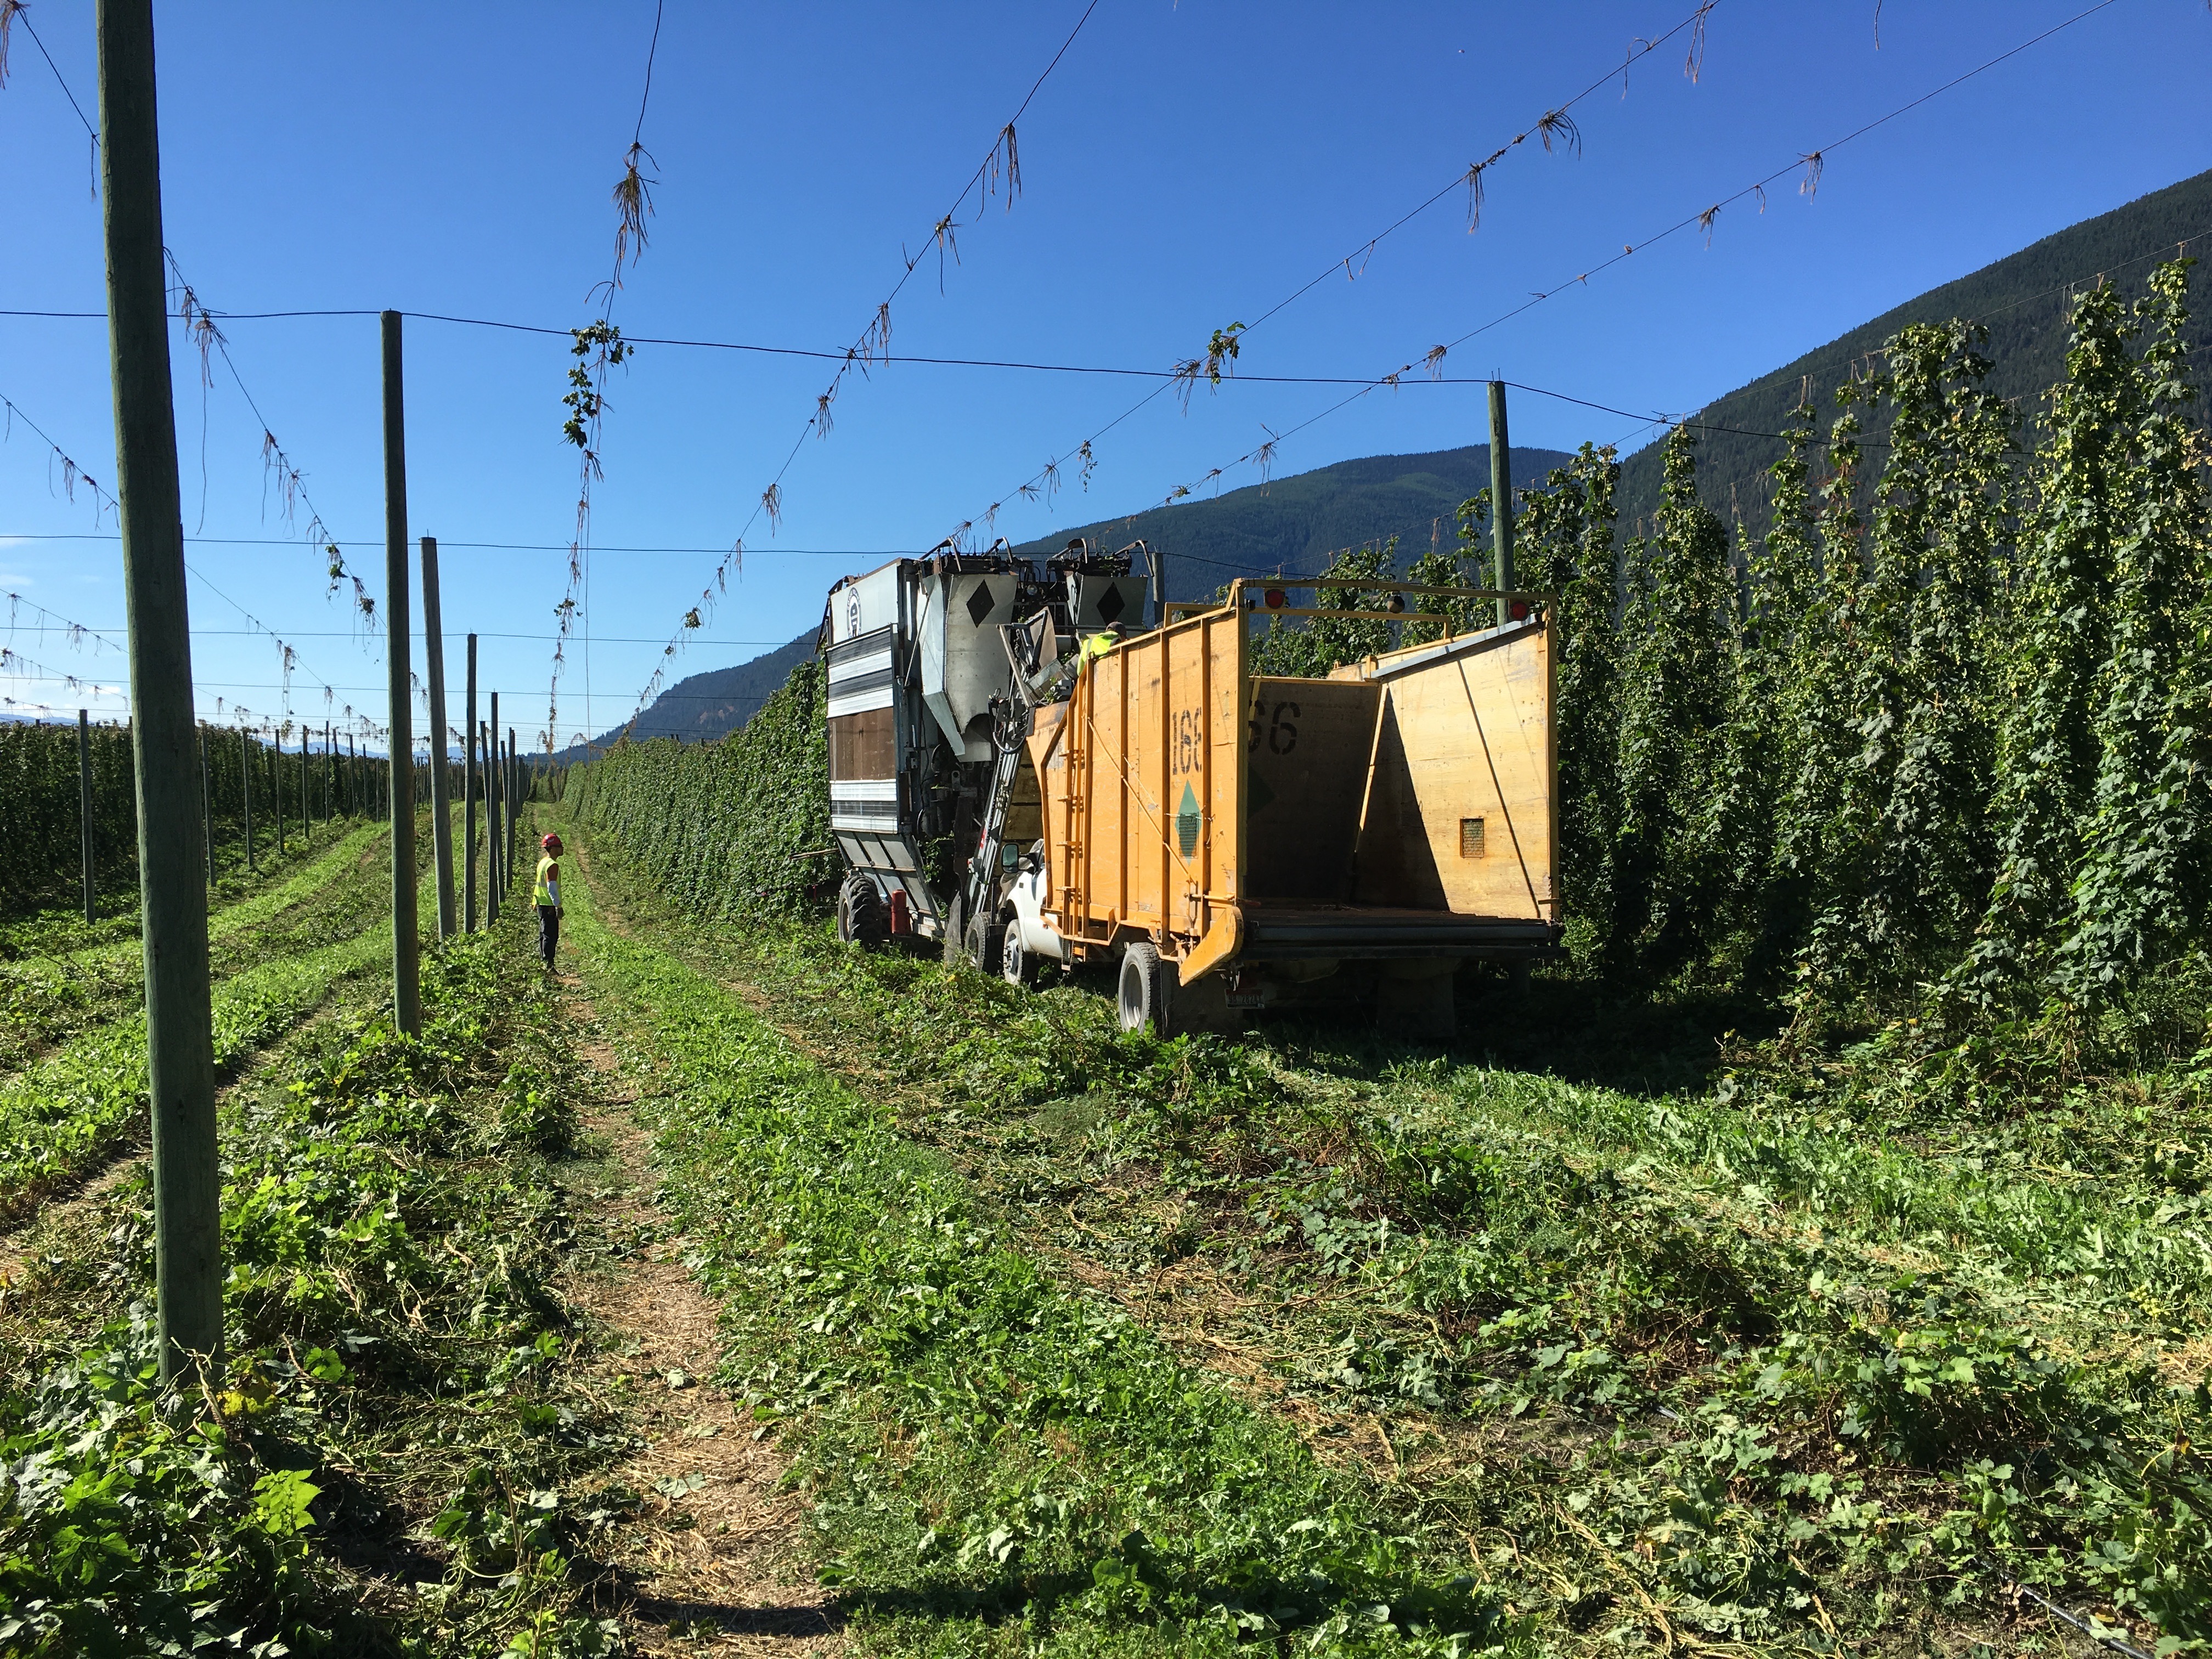 The Elk Mountain Farms build hop picker that was harvesting Saaz Hops during our visit on the farm.